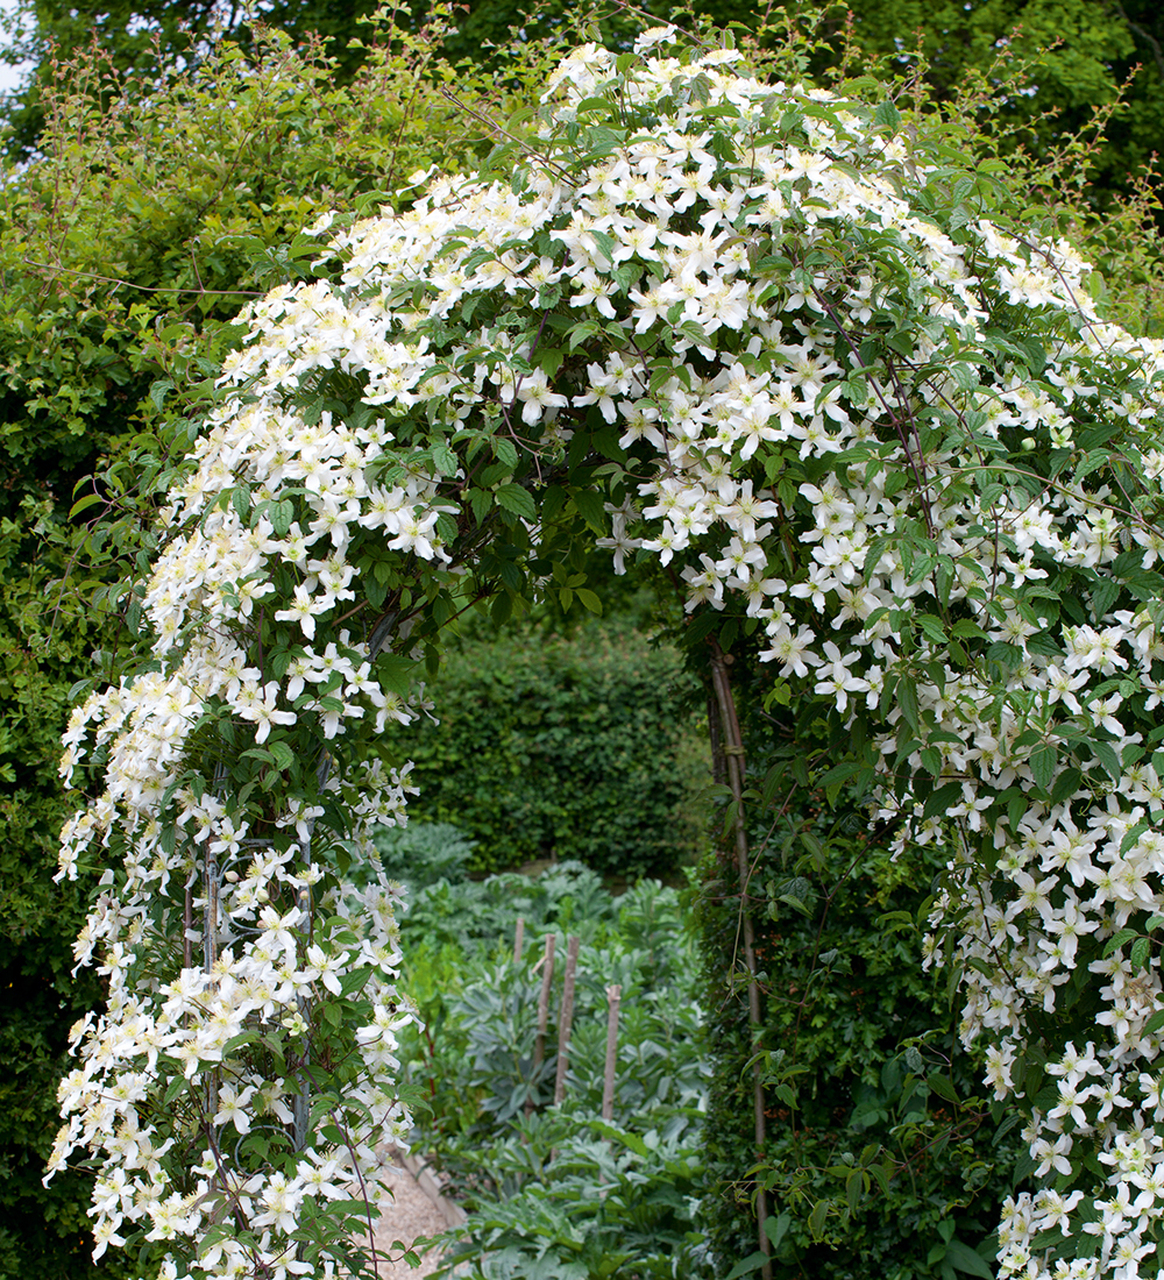 Clematis flowers growing over an arch